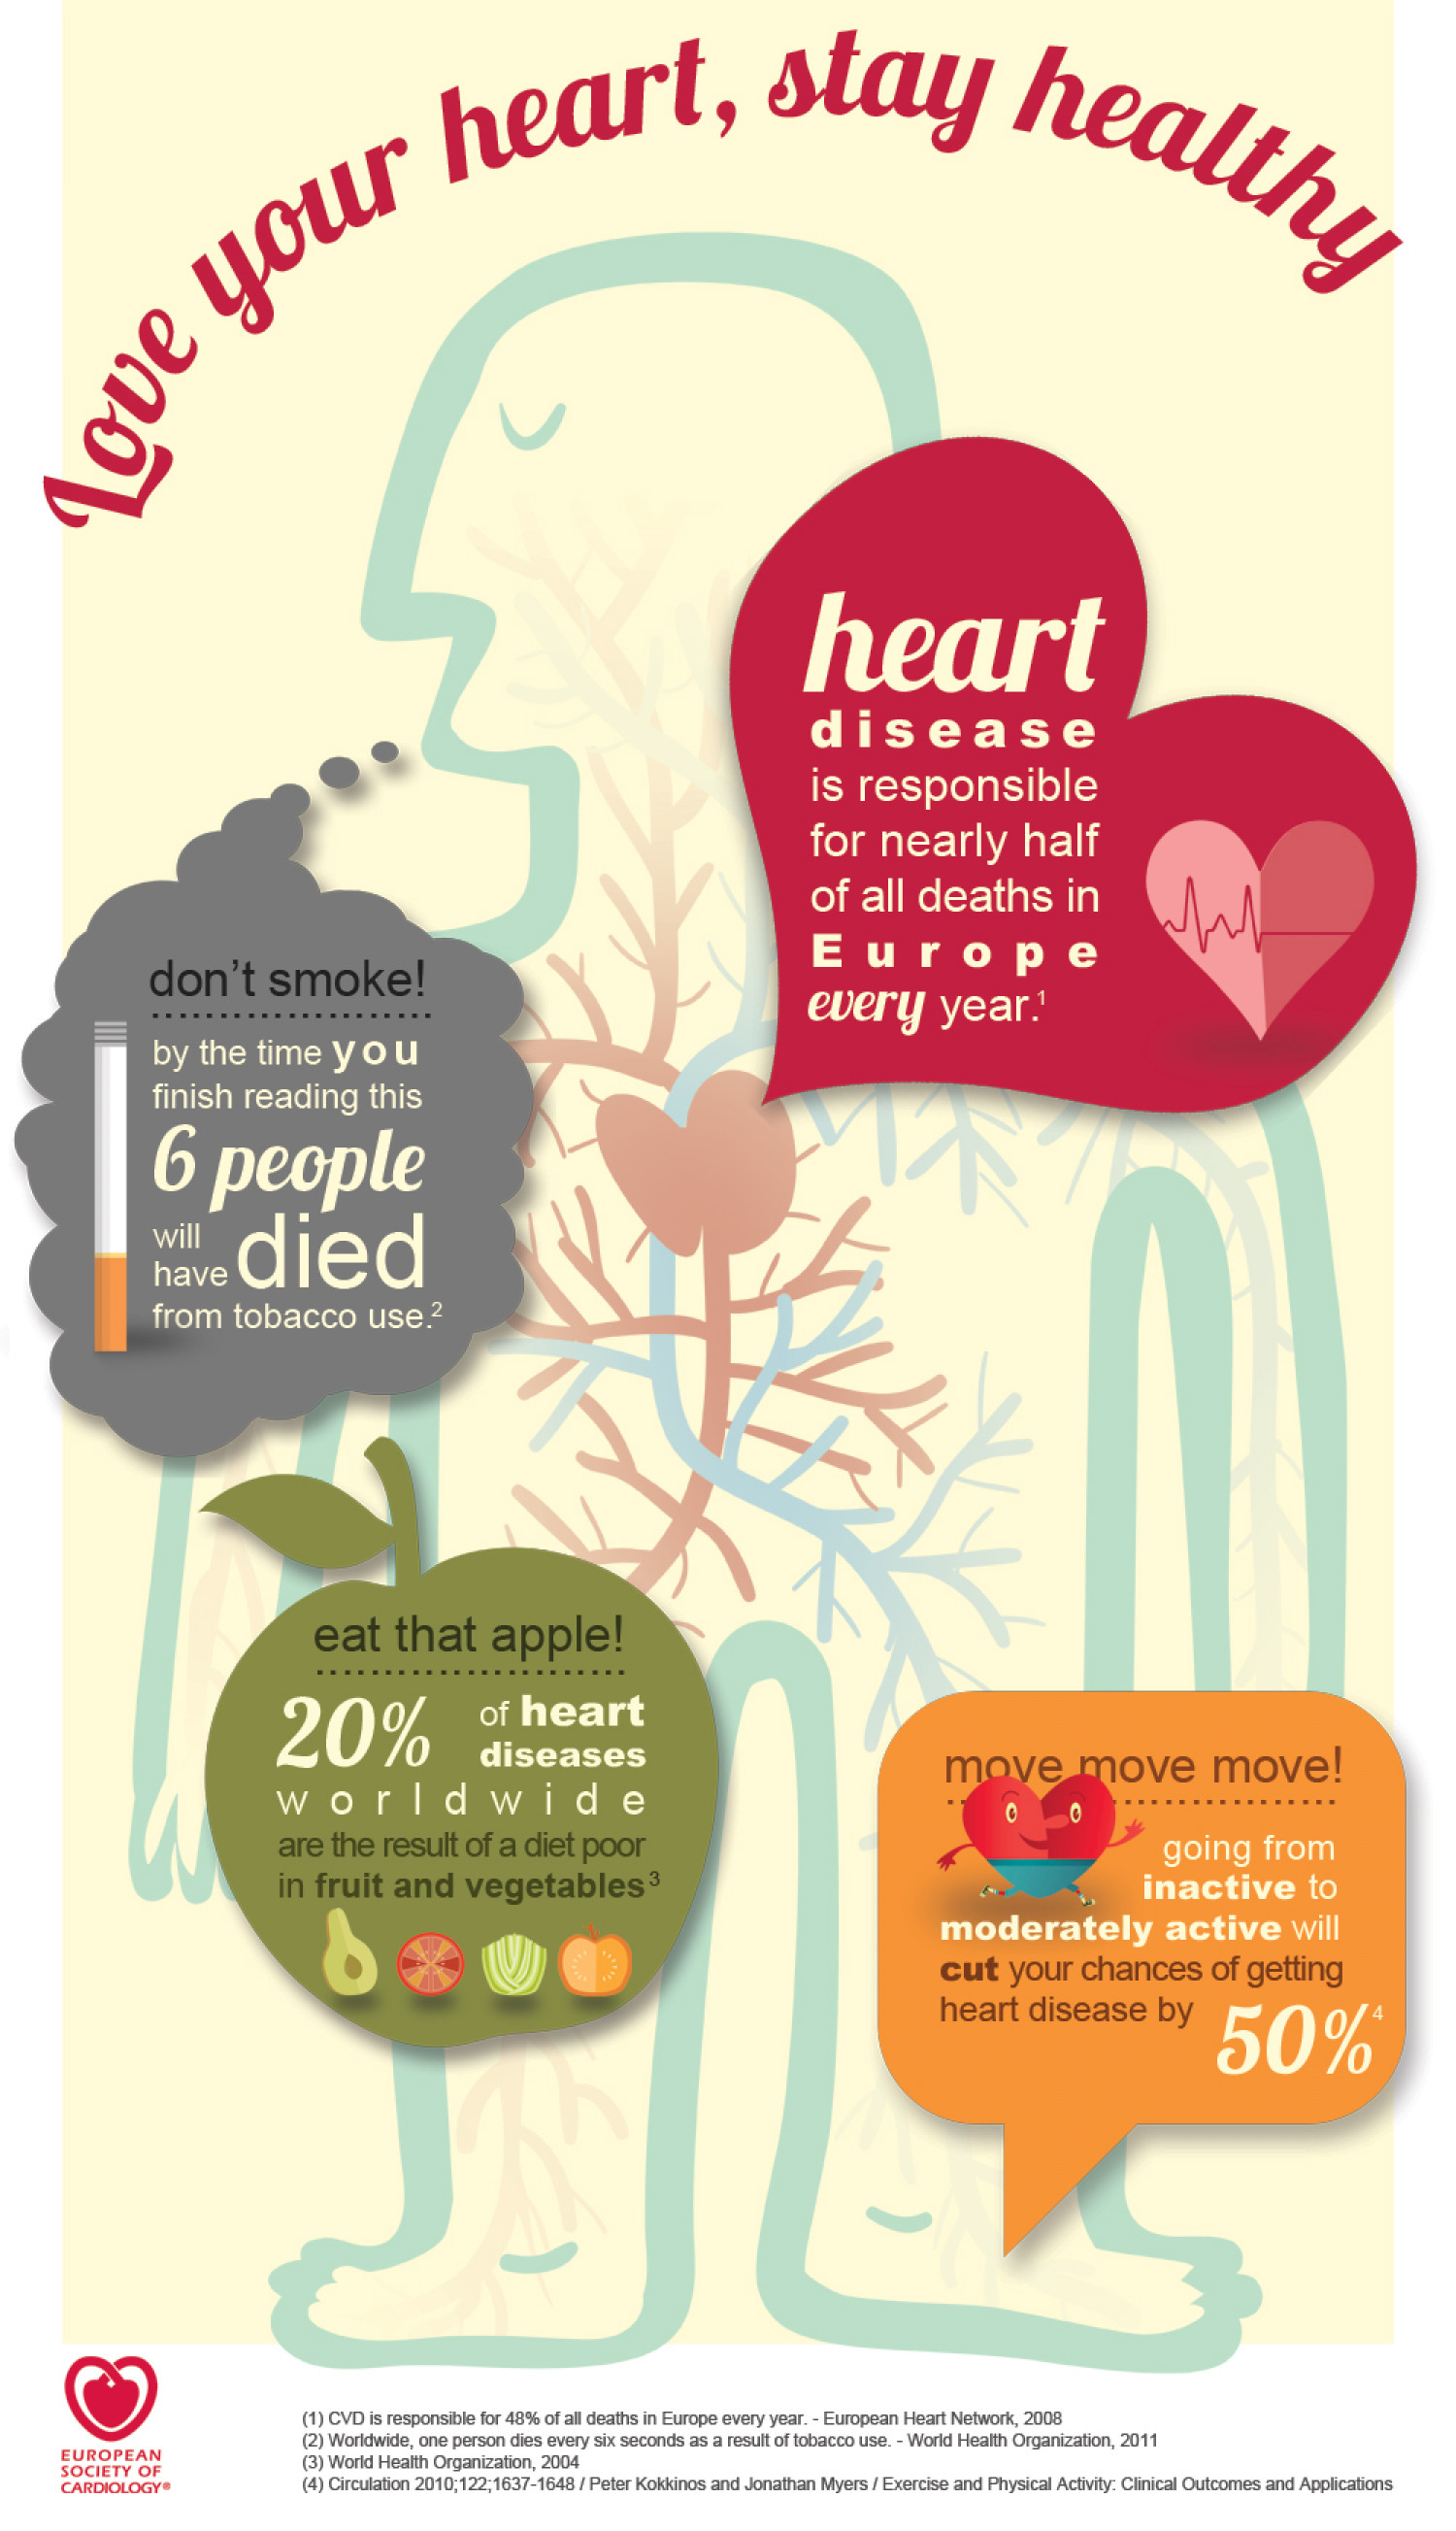 Love your heart, stay healthy Infographic